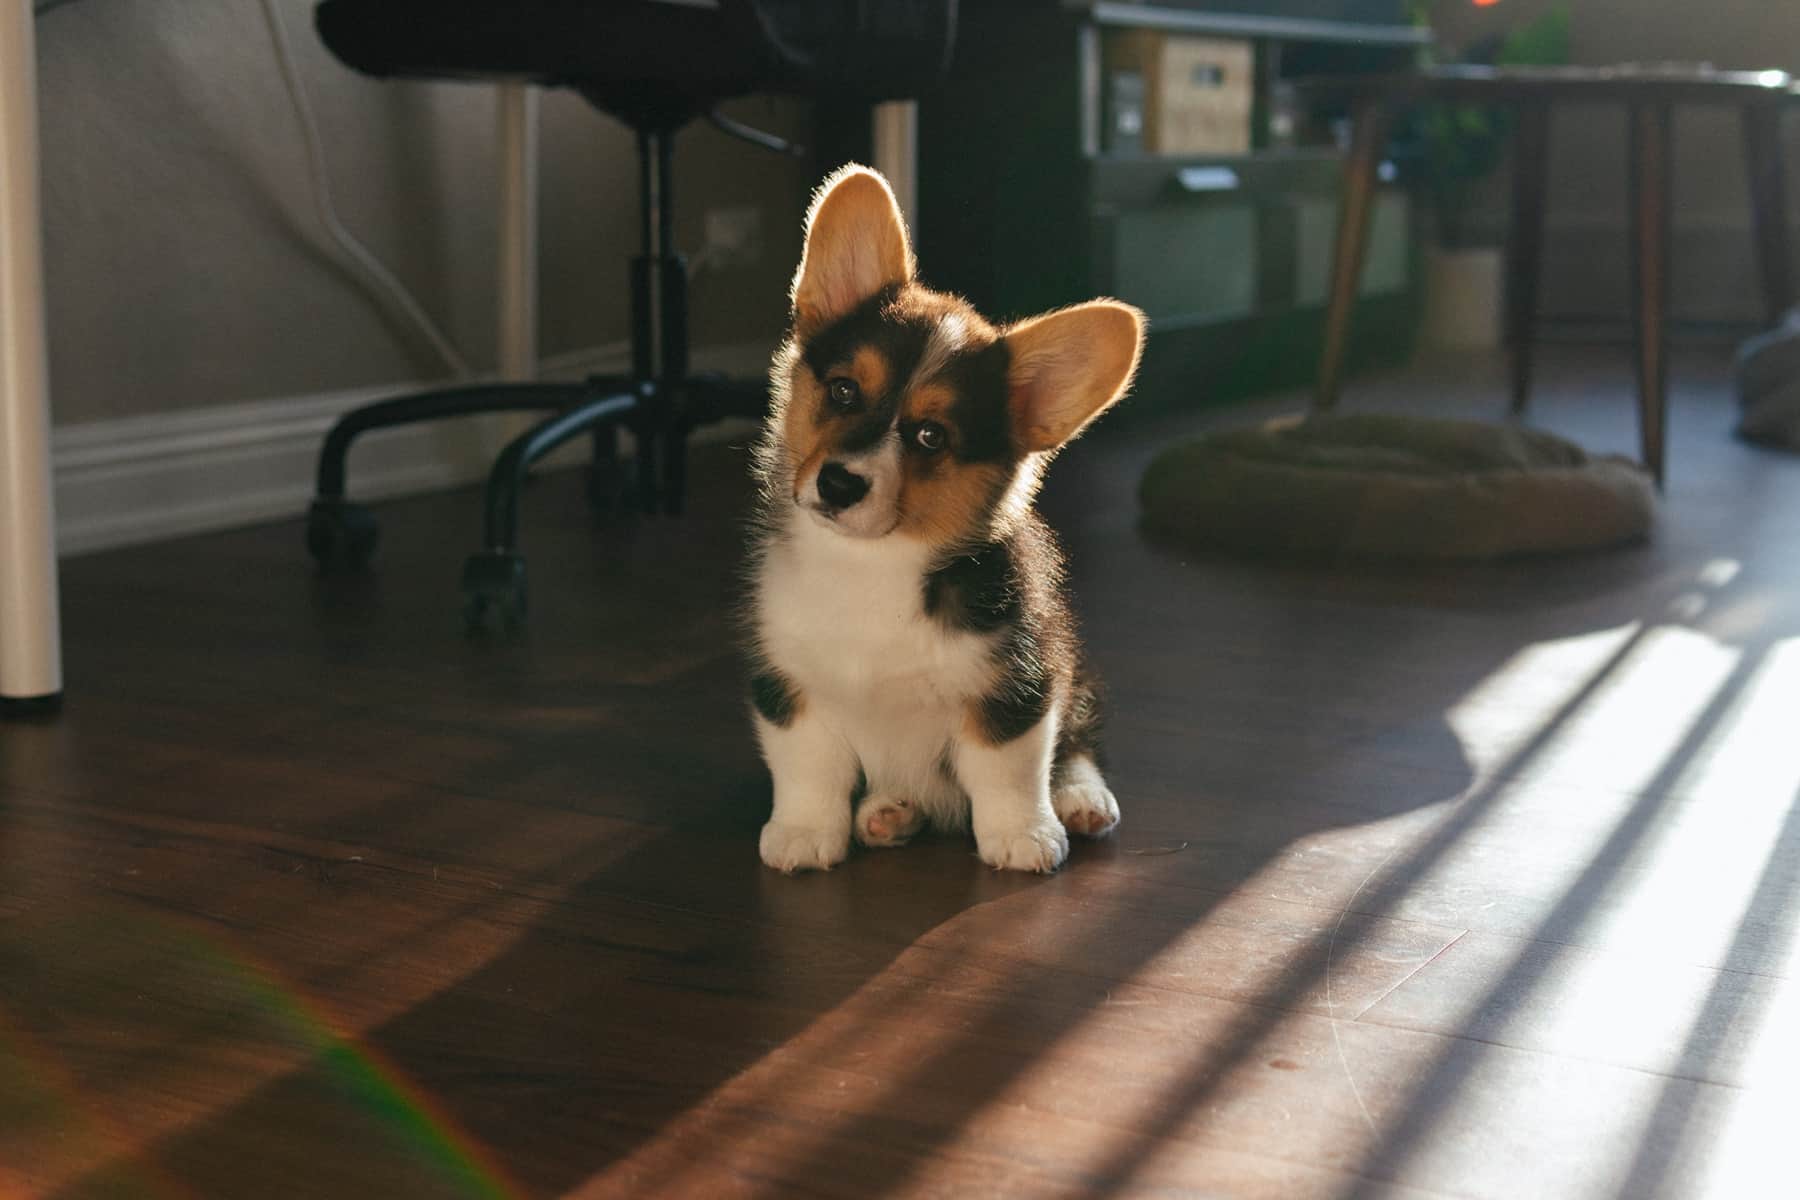 Are corgis social dogs? Yes, and they don't like being left alone like this Pembroke corgi in this dark apartment.